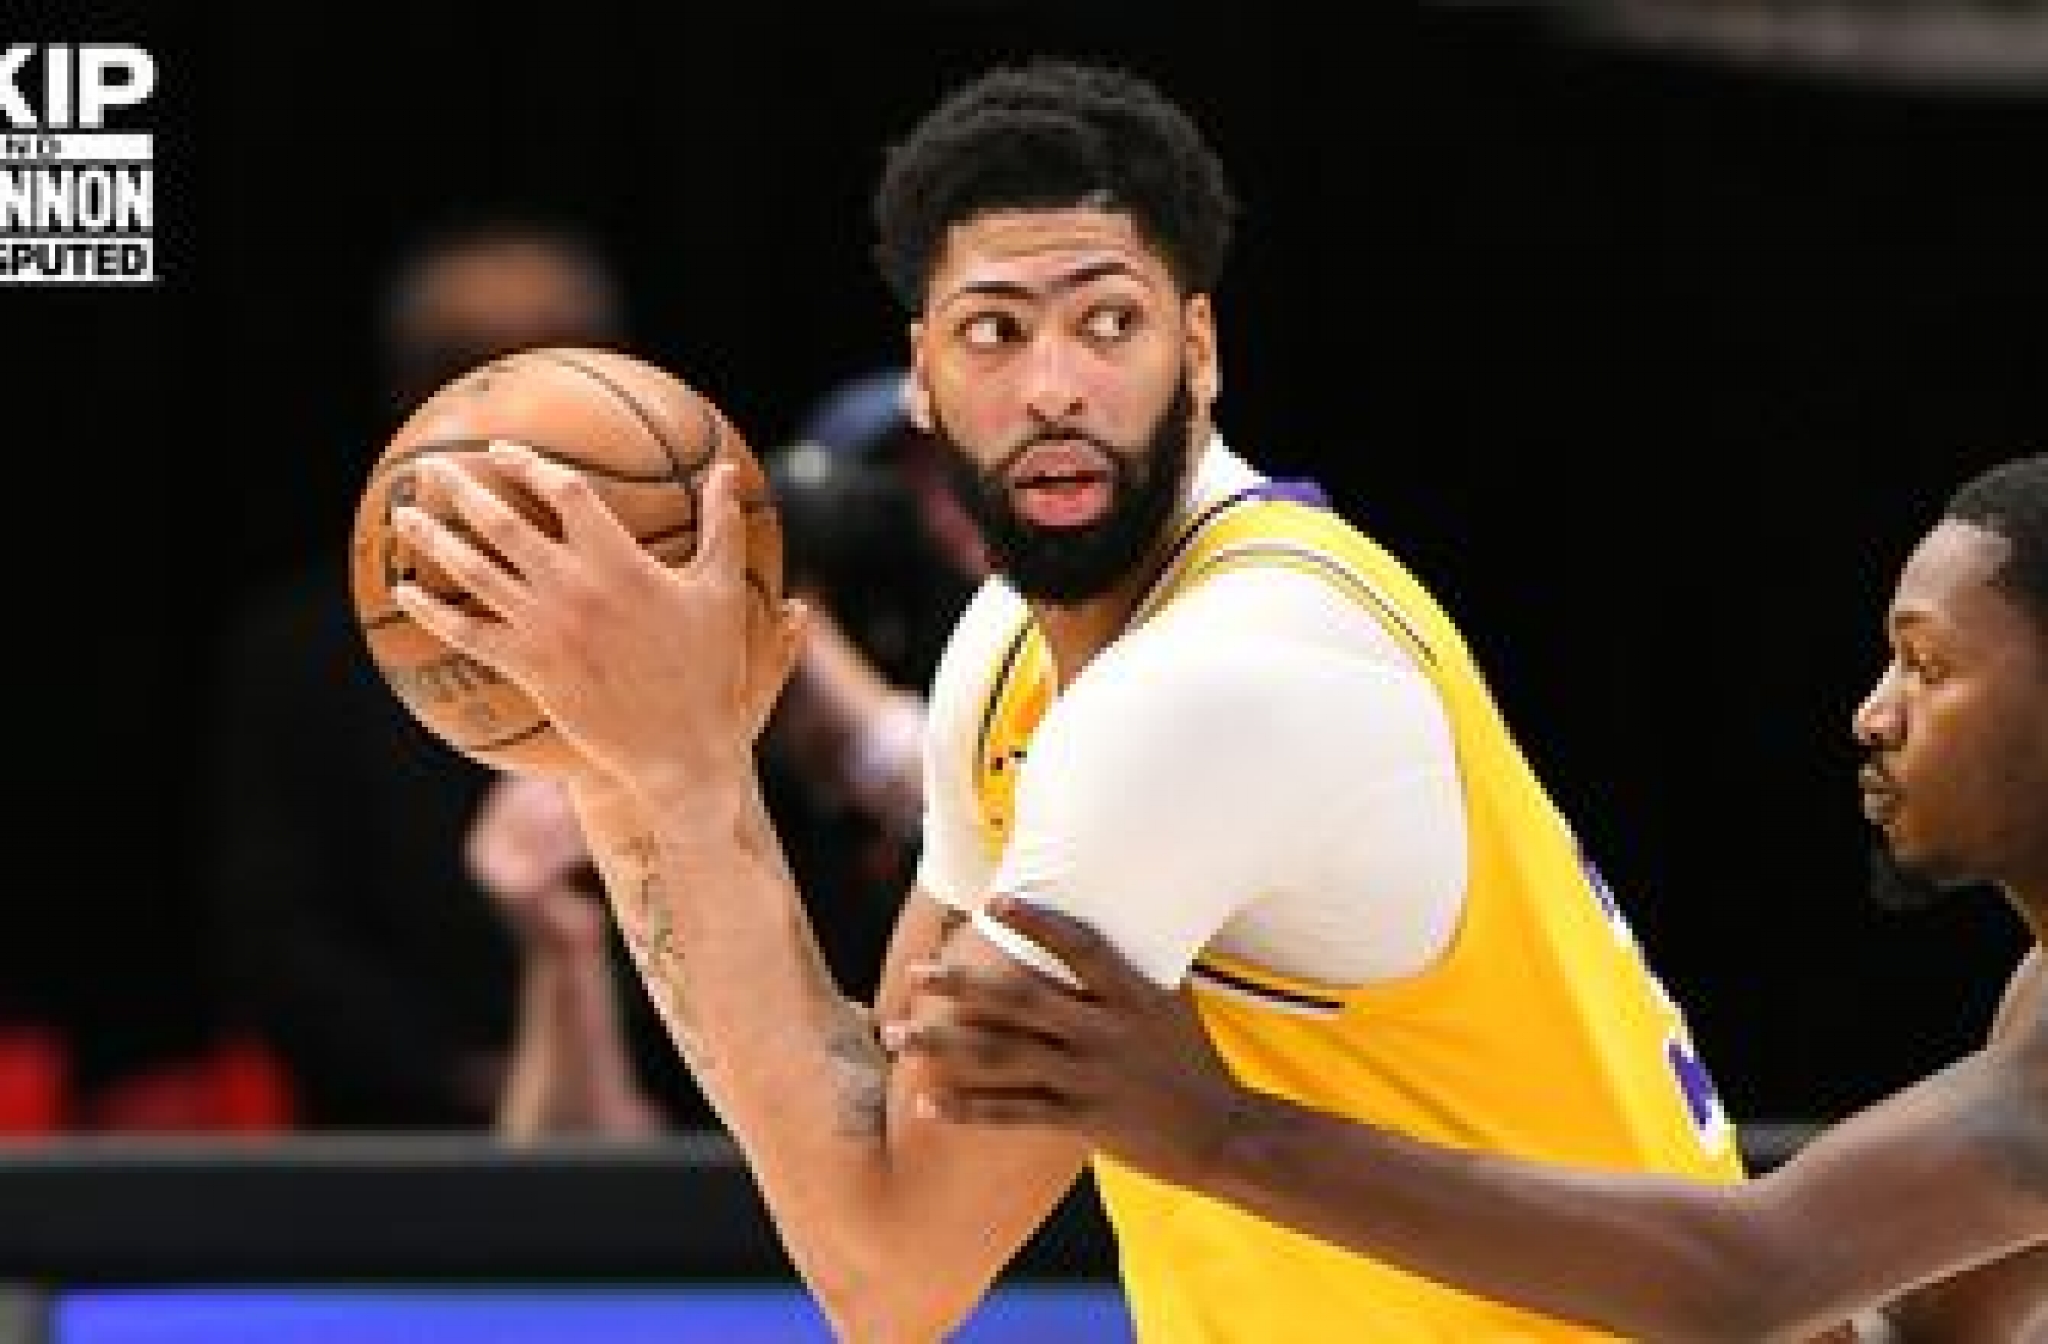 Shannon Sharpe on Anthony Davis’ “encouraging” return to Lakers after missing 9 weeks | UNDISPUTED